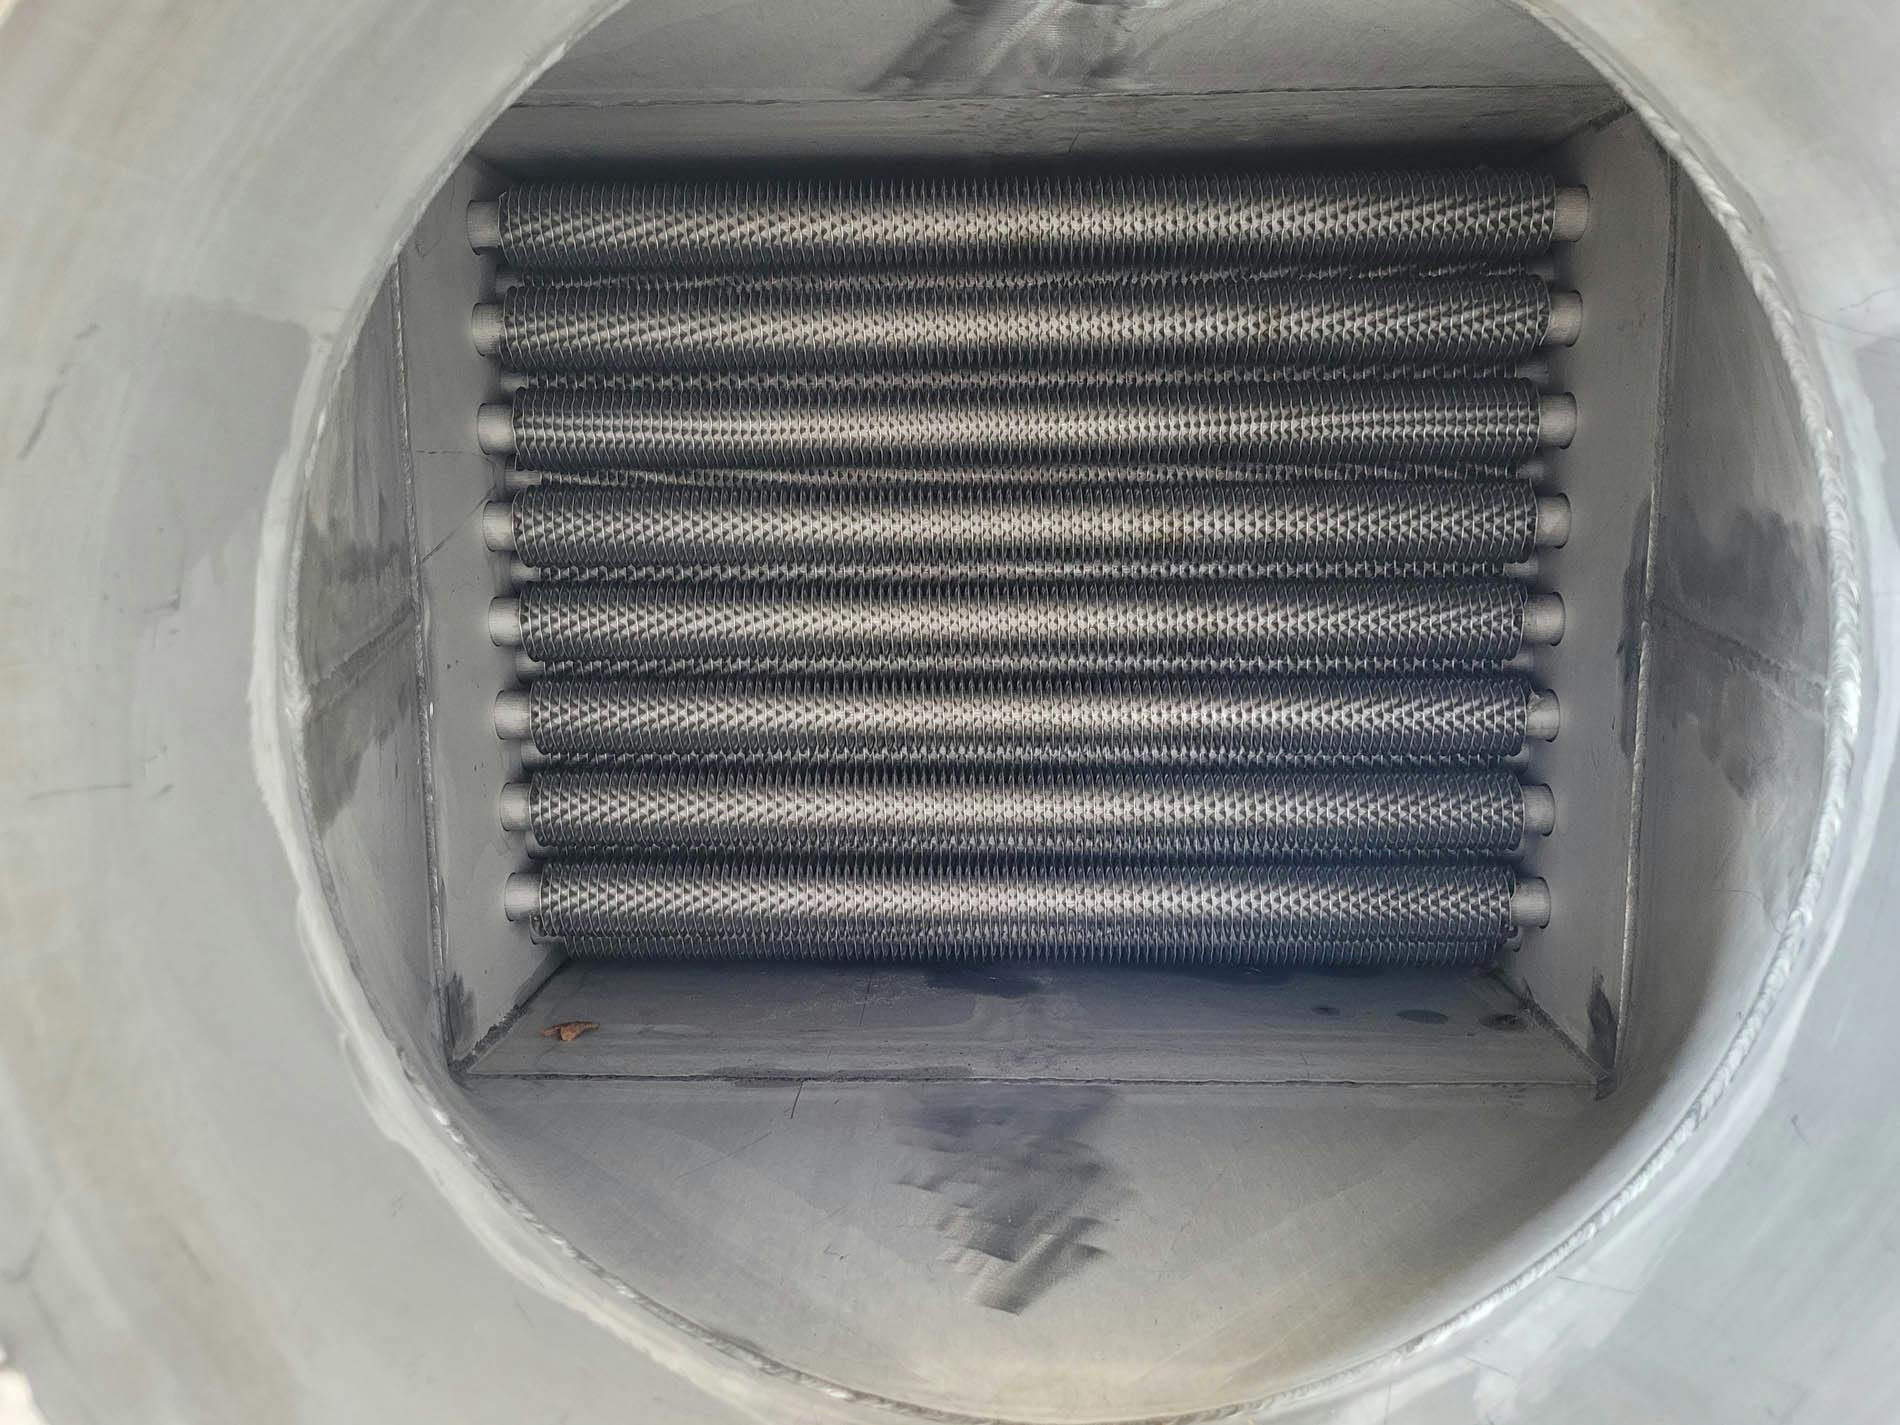 Enco "Finned / Rippenrohr" - Shell and tube heat exchanger - image 6